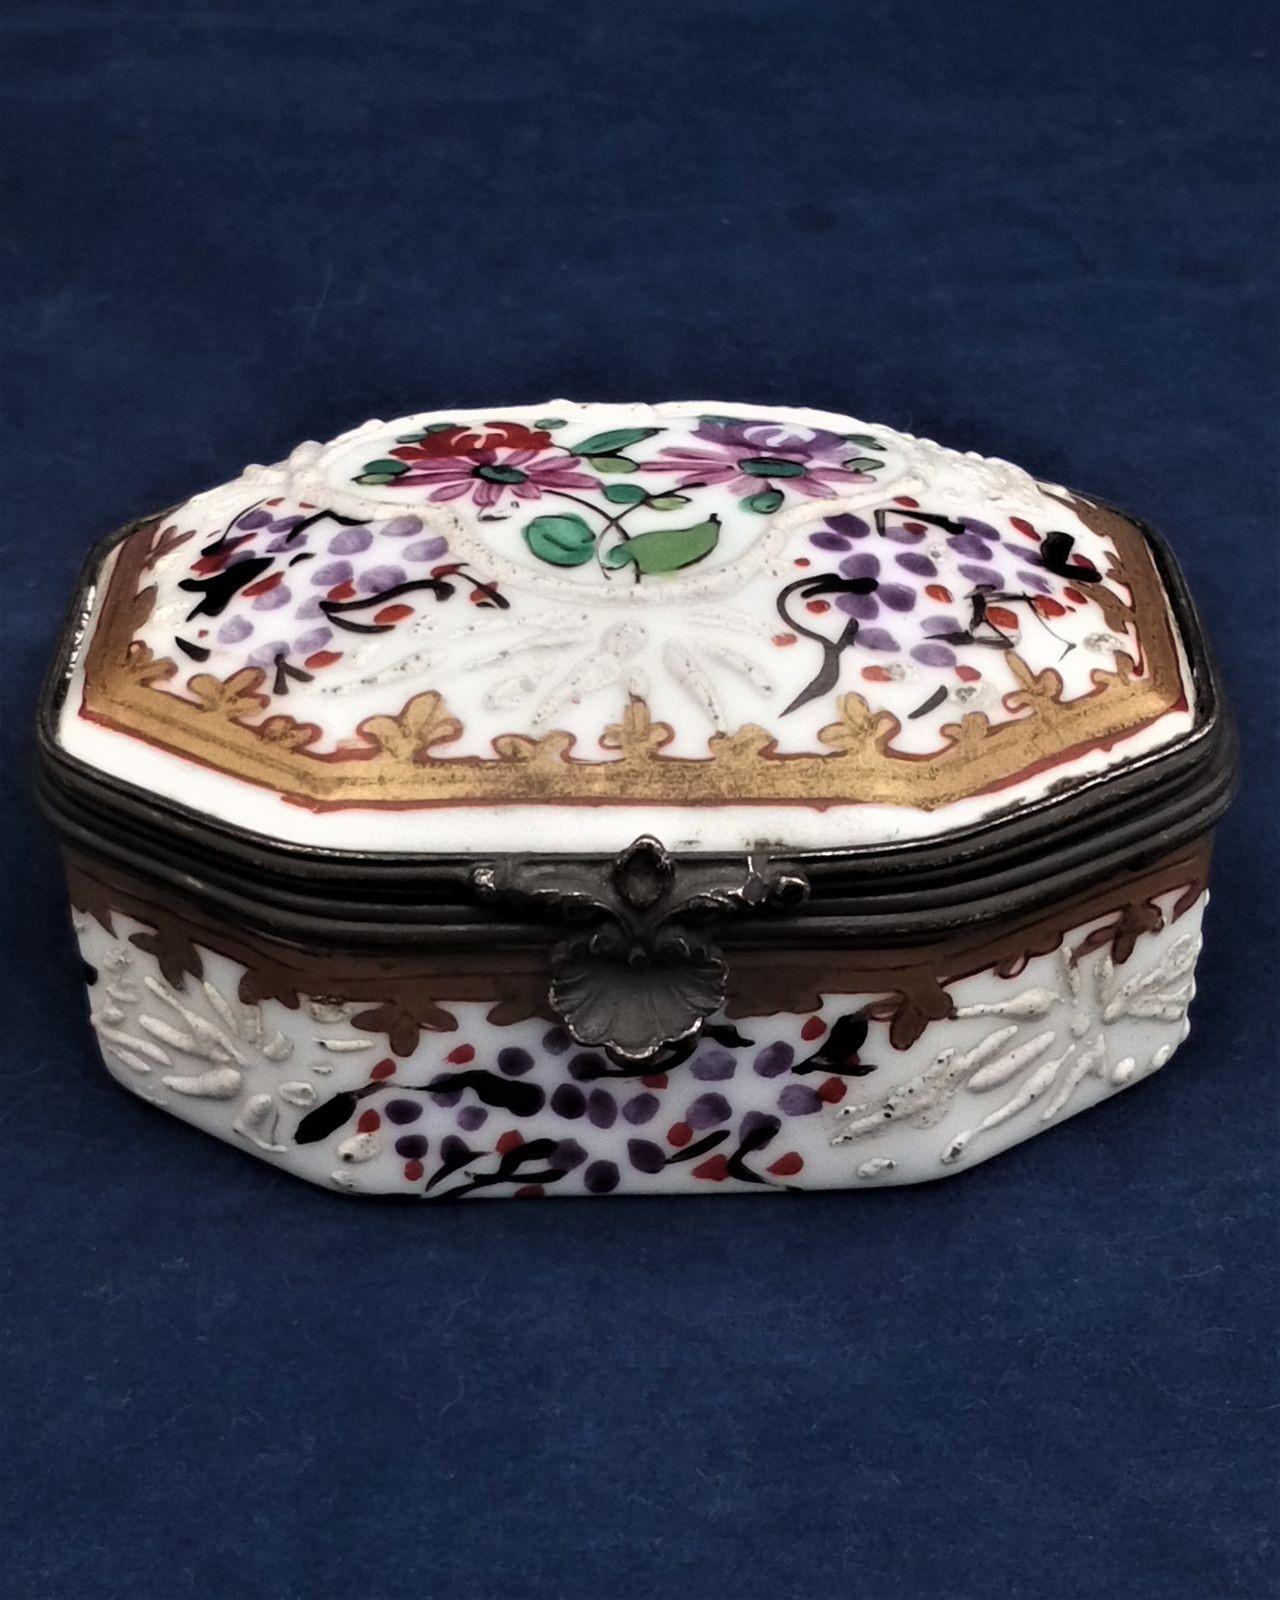 Antique Japanese floral Moriage porcelain snuff, pill or small trinket box brass frame Meiji period 19th circa 1890